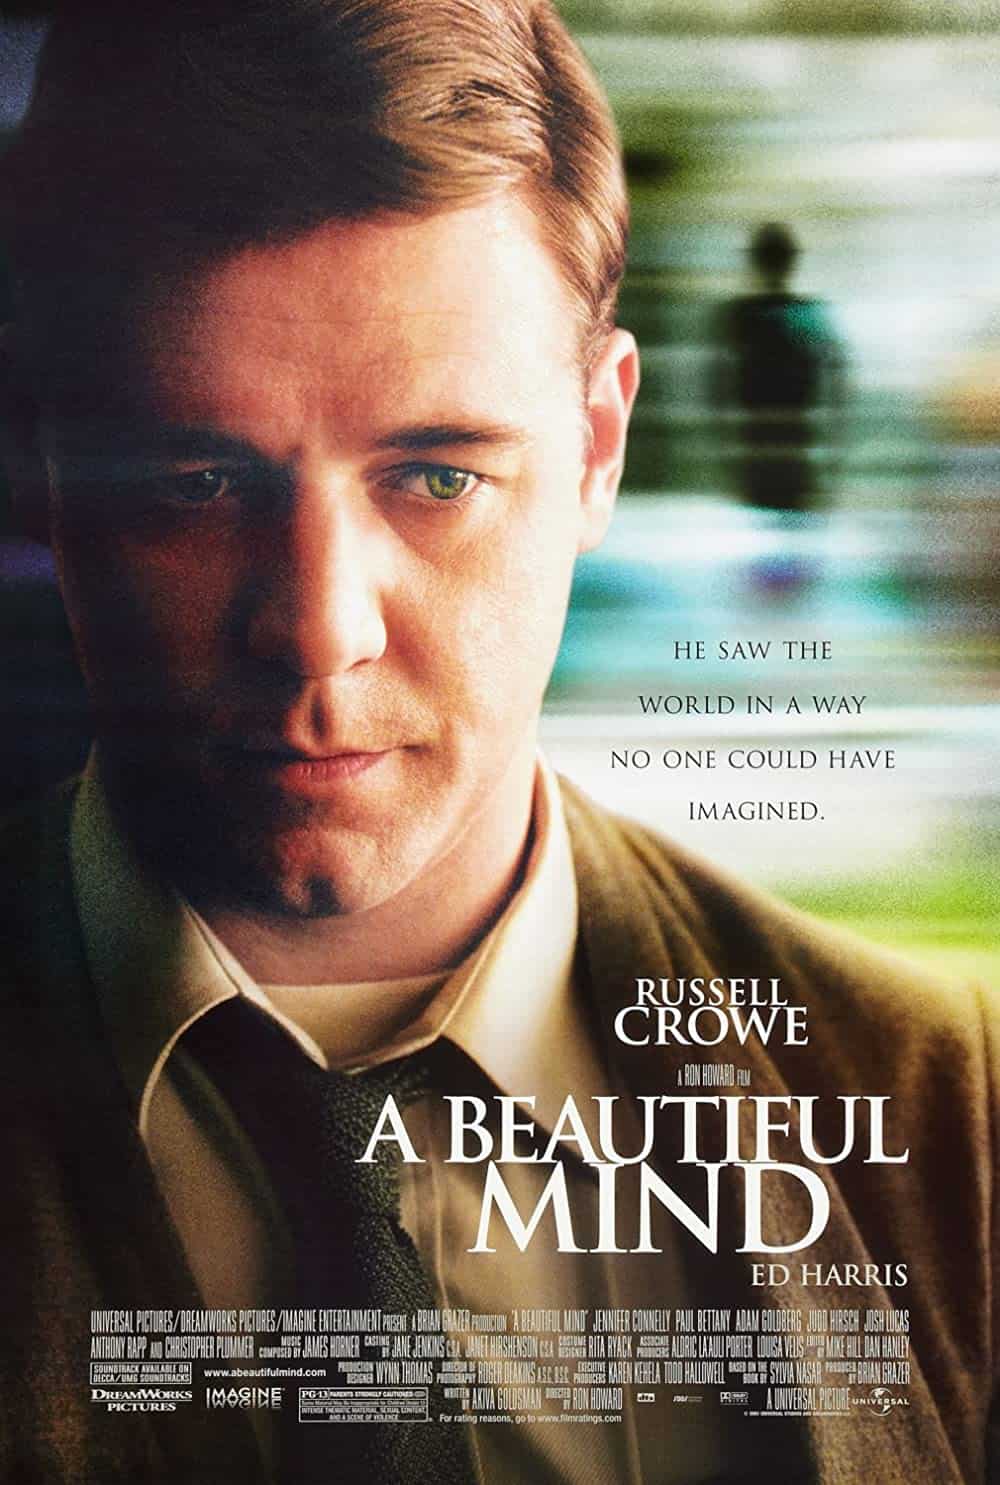 A Beautiful Mind (2001) Best Math Movies to Add in Your Watchlist